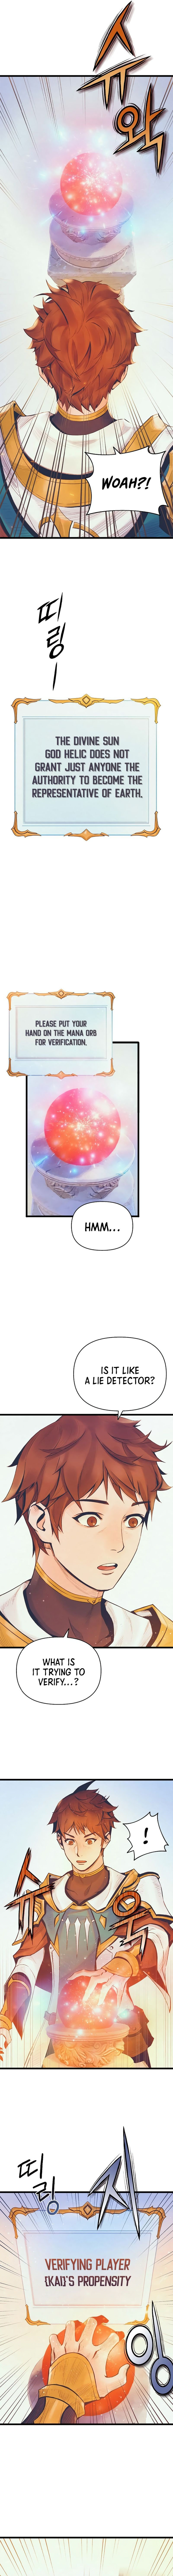 the-healing-priest-of-the-sun-chap-3-8